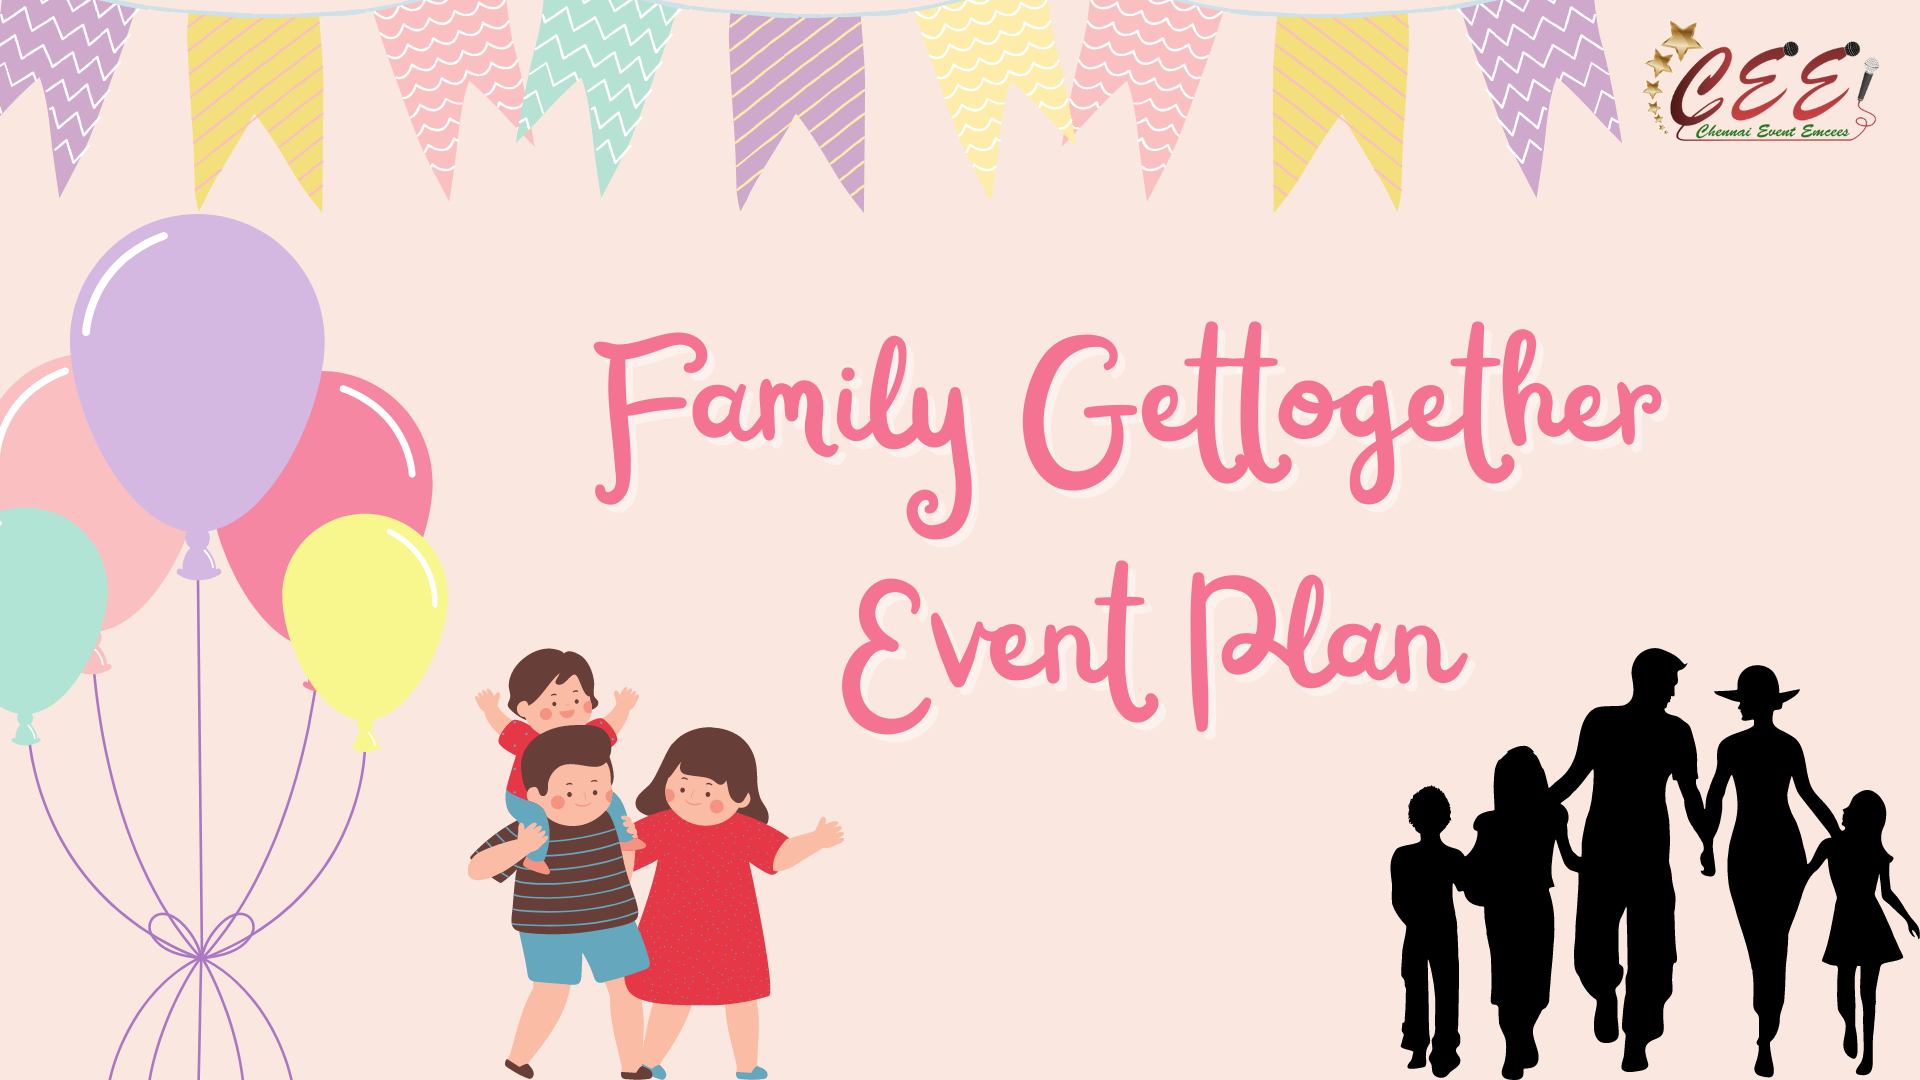 Event Plan for Family Get Together Event by Chennai Male Emcee Thamizharasan Karunakaran